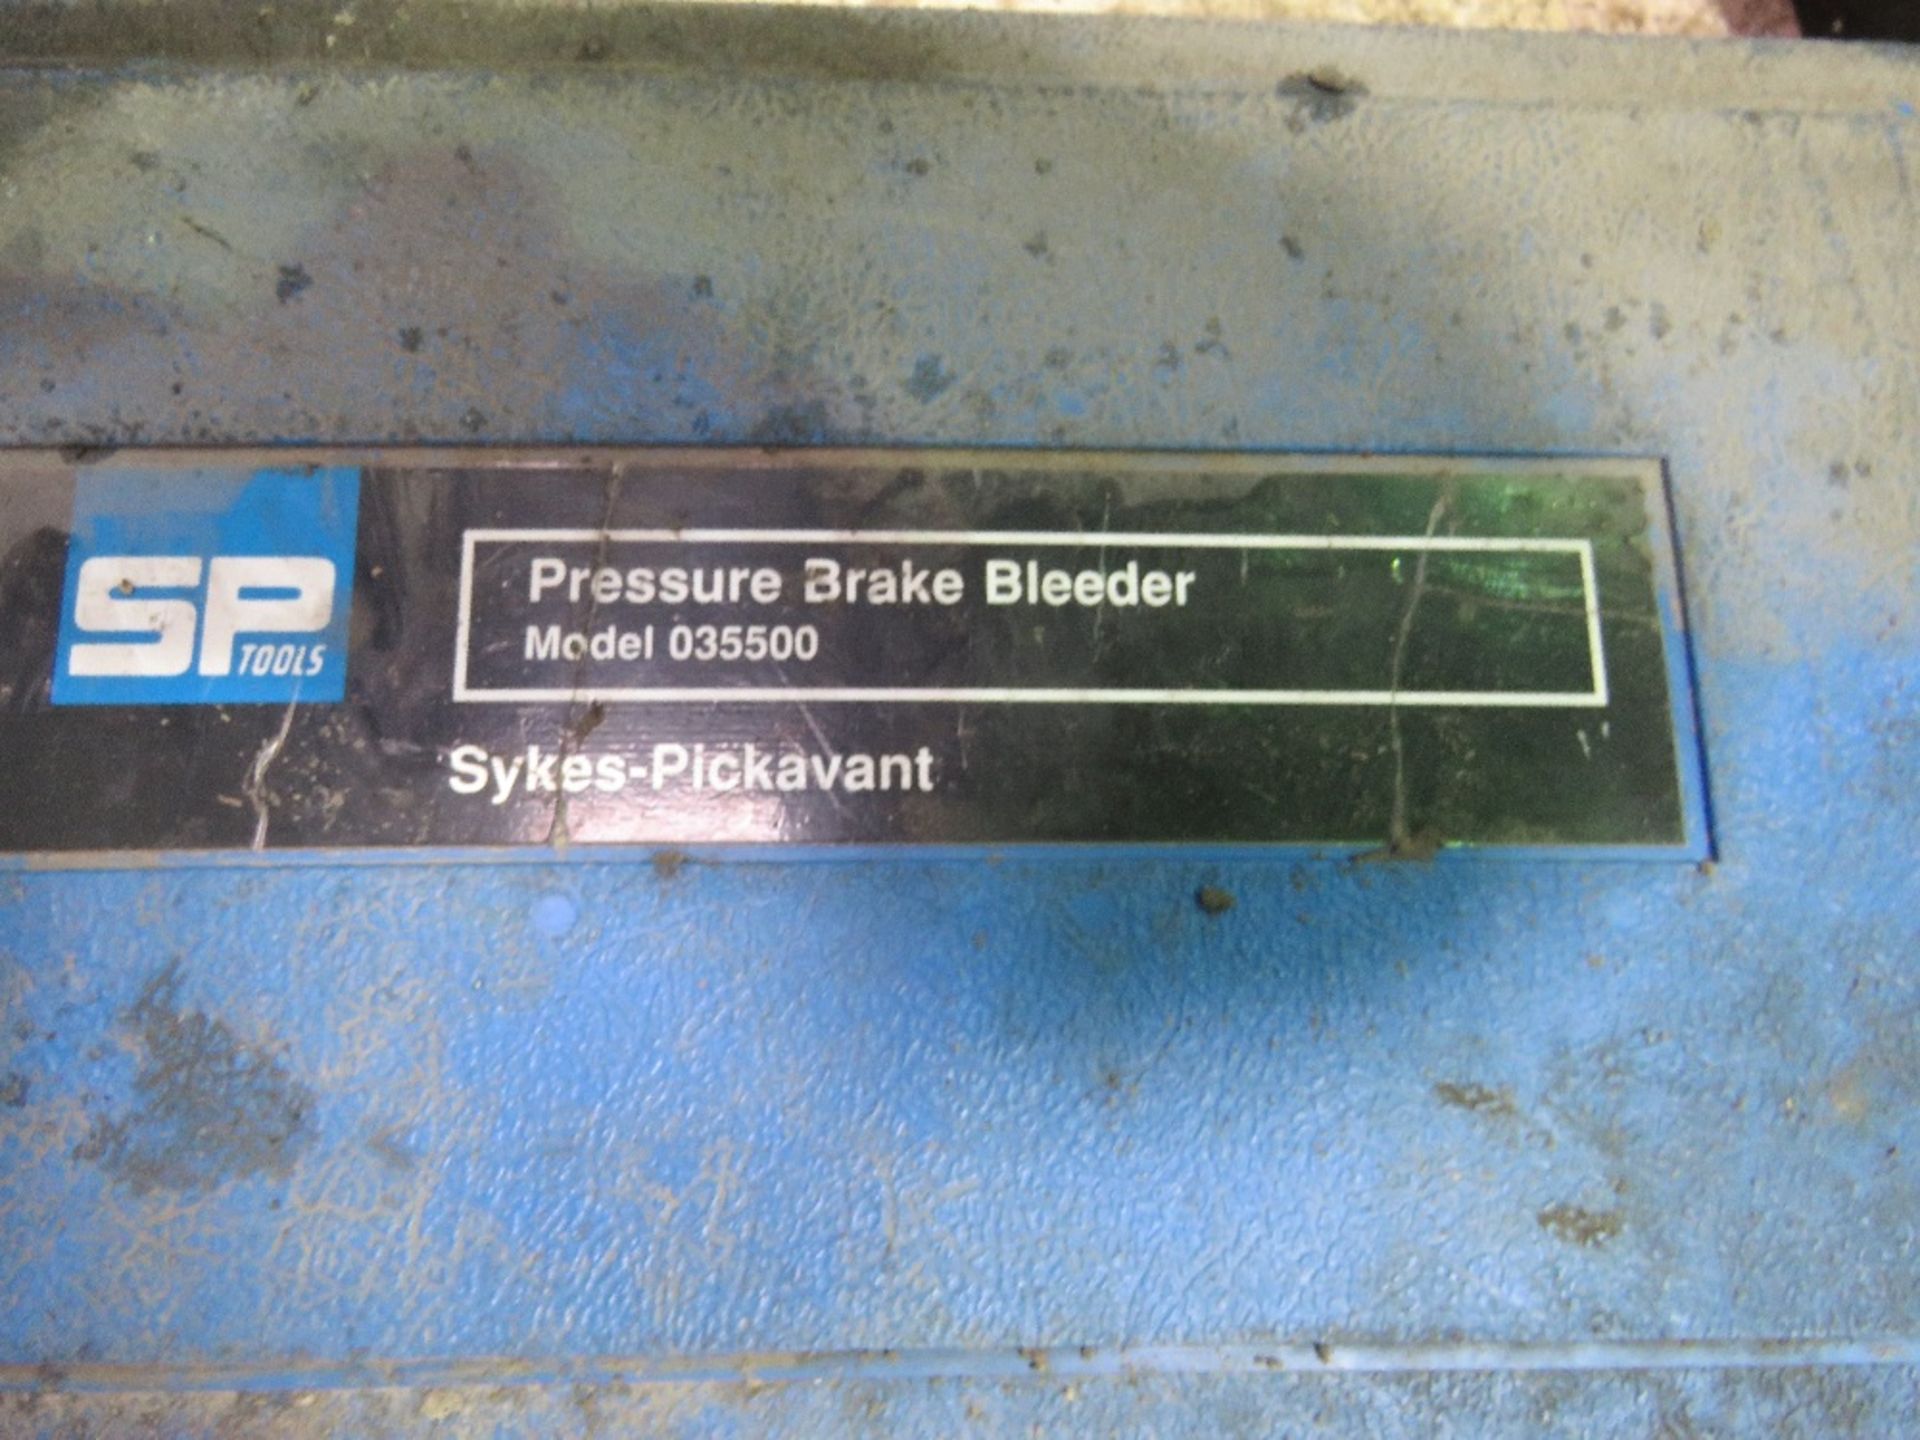 POWER BRAKE BLEED SET AND COMPRESSION TESTER. SOURCED FROM GARAGE COMPANY LIQUIDATION. - Image 3 of 3